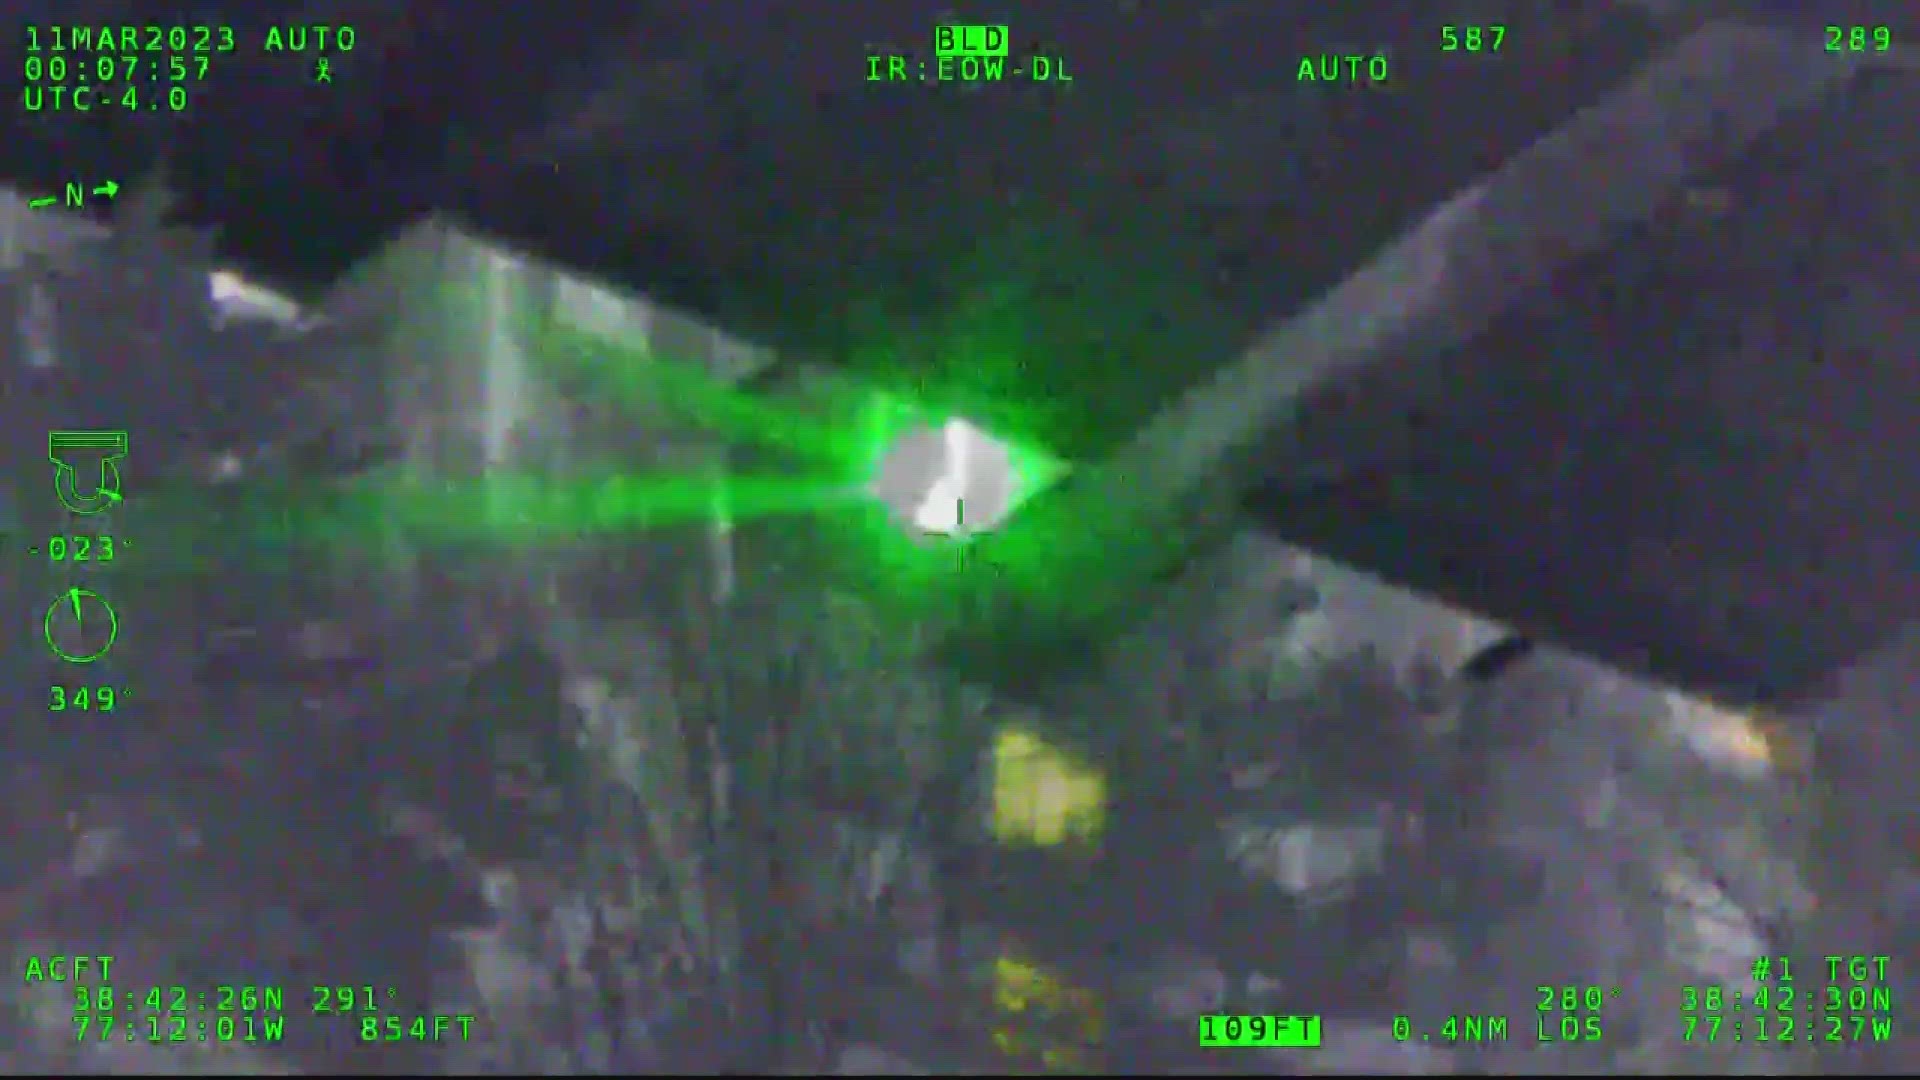 A Virginia man is facing charges after allegedly pointing a laser at a police helicopter in Fairfax County.